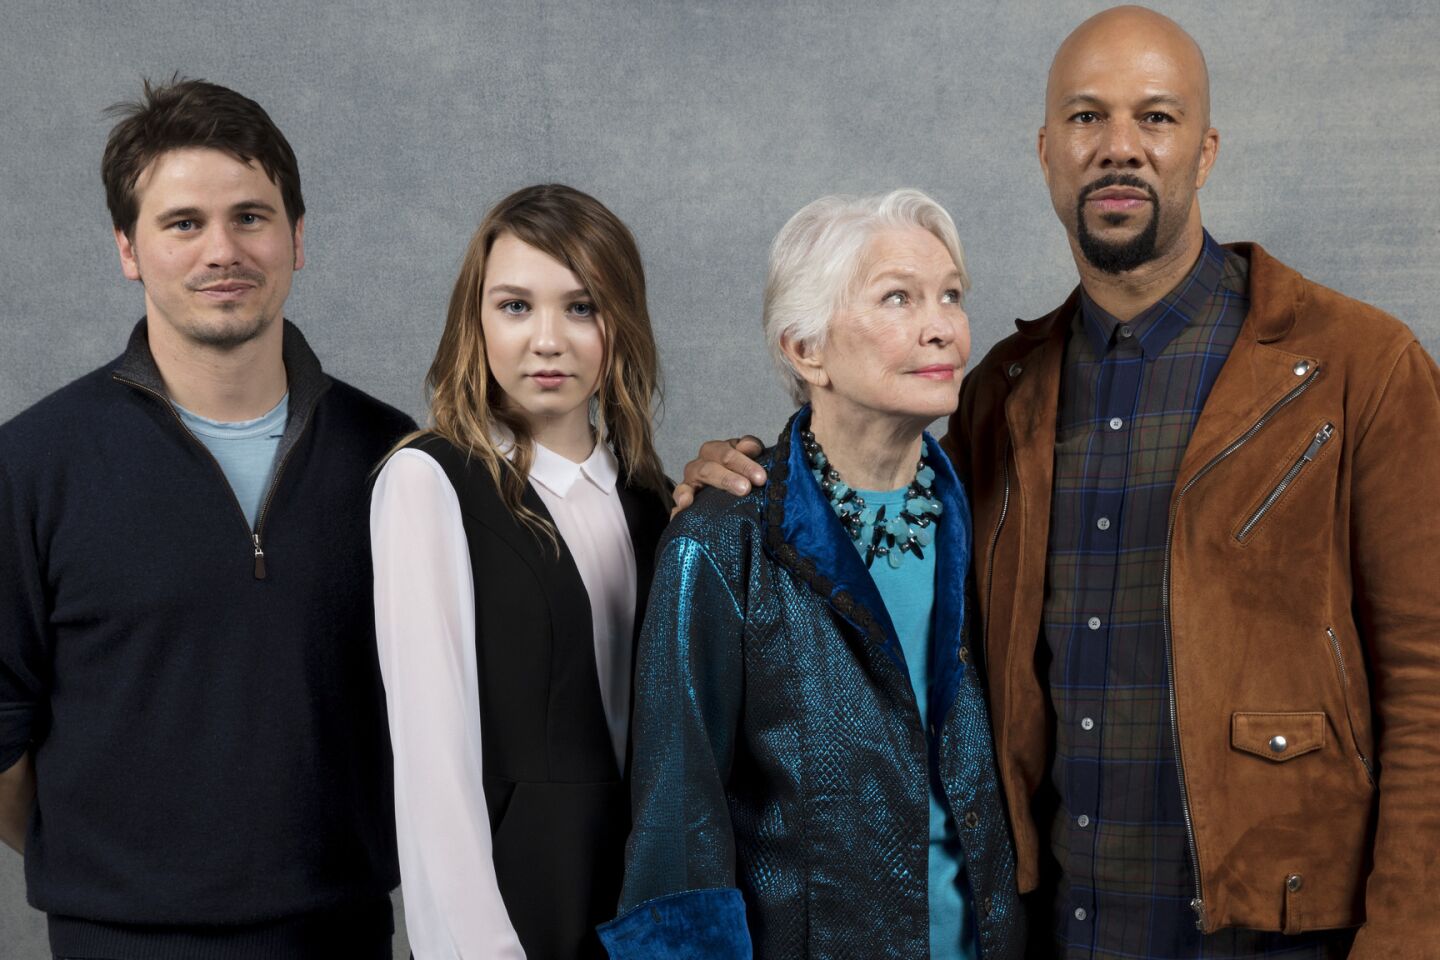 Actor Jason Ritter, actress Isabelle Nelisse, actress Ellen Burstyn, and actor Common, from the film "The Tale," photographed in the L.A. Times Studio at Chase Sapphire on Main, during the Sundance Film Festival in Park City, Utah, Jan. 21, 2018.